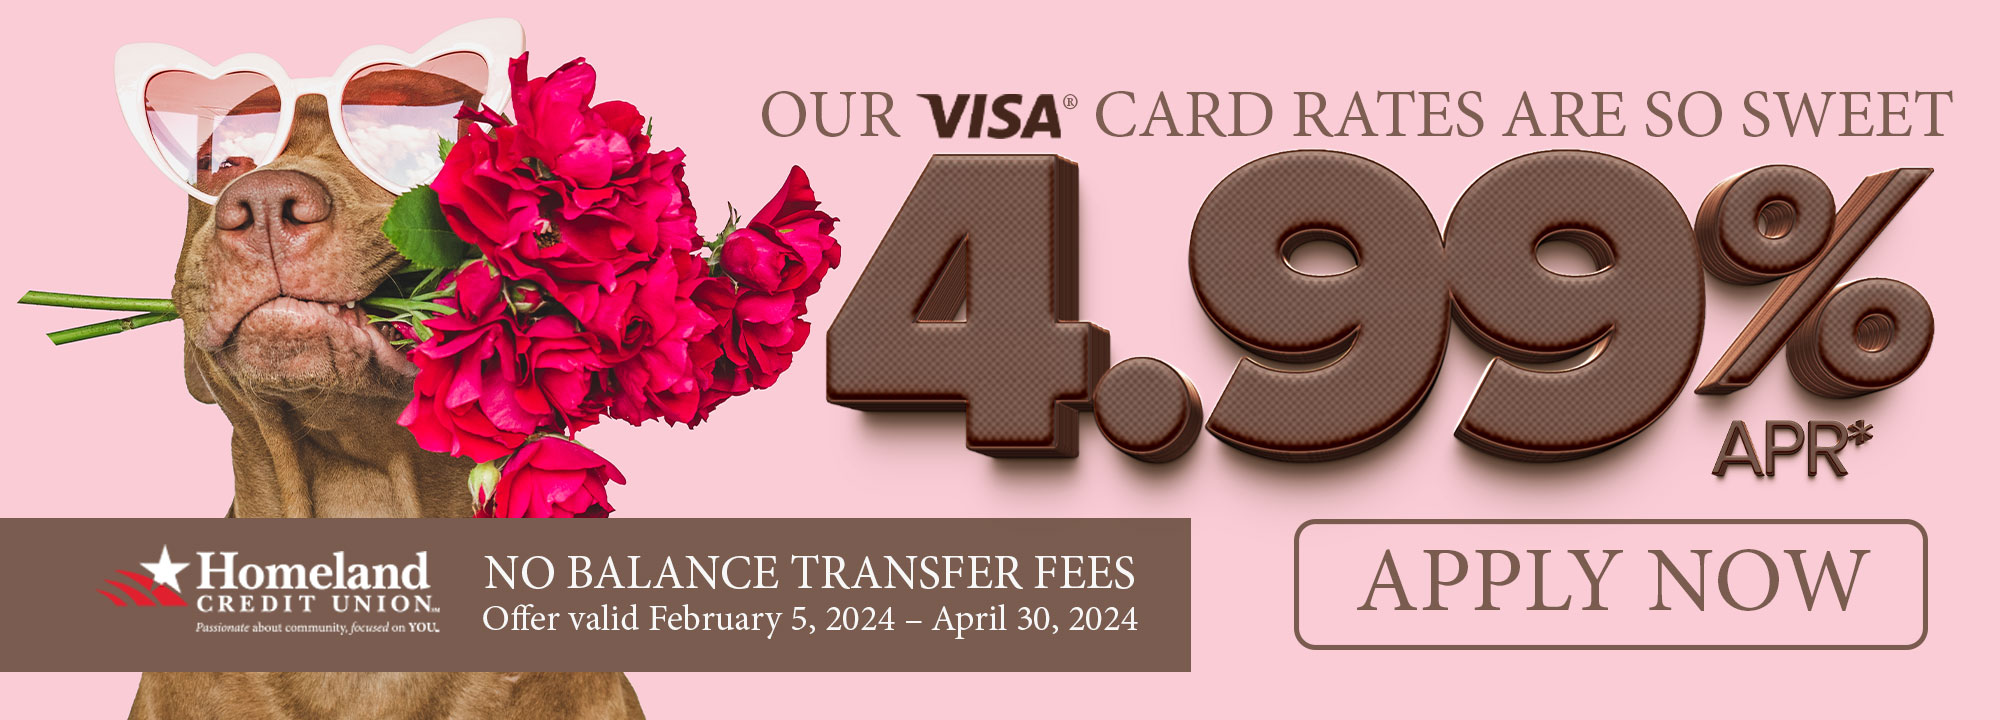 Our VisaÂ® Card Rates are so sweet. 4.99% APR* no balance transfer fees. Offer valid February 5, 2024 - April 30th, 2024. *Apply Now